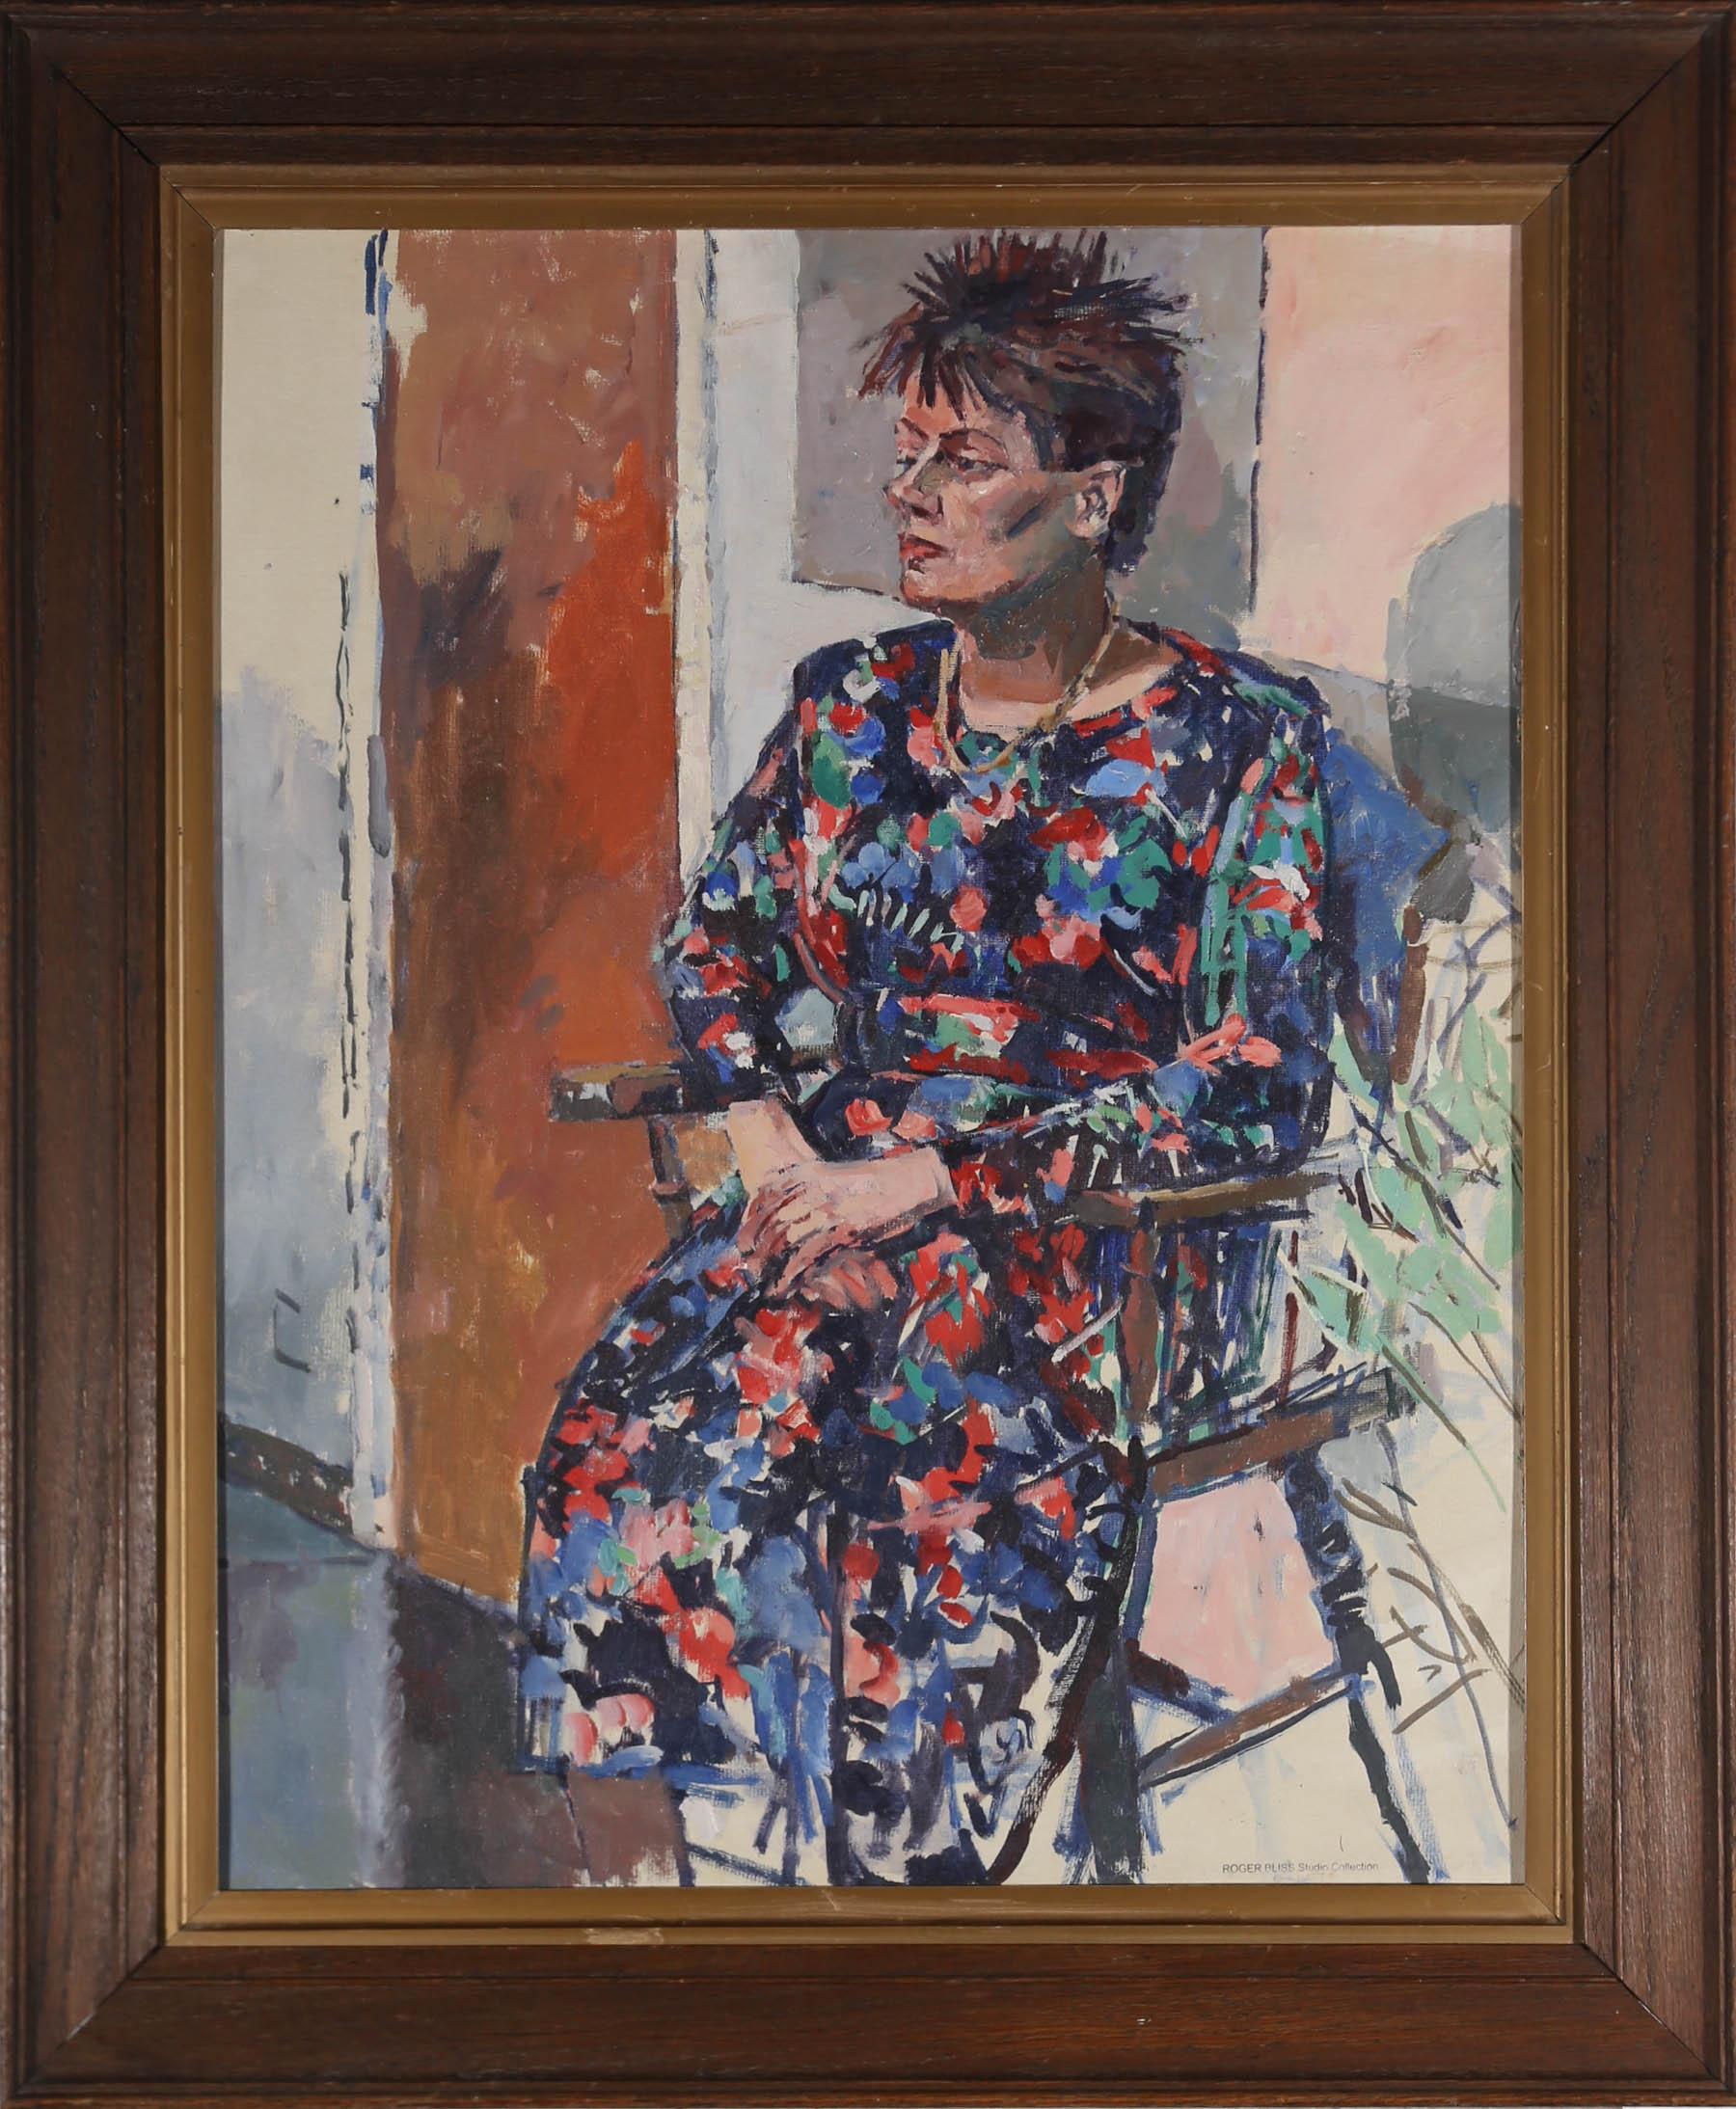 A fine 20th Century oil portrait in a gestural impressionistic style showing a woman dressed in bright florals, with elbows rested in a wooden arm chair. Jarring with the women's daring fashion scene is her crop red hair, spiked through the top in a